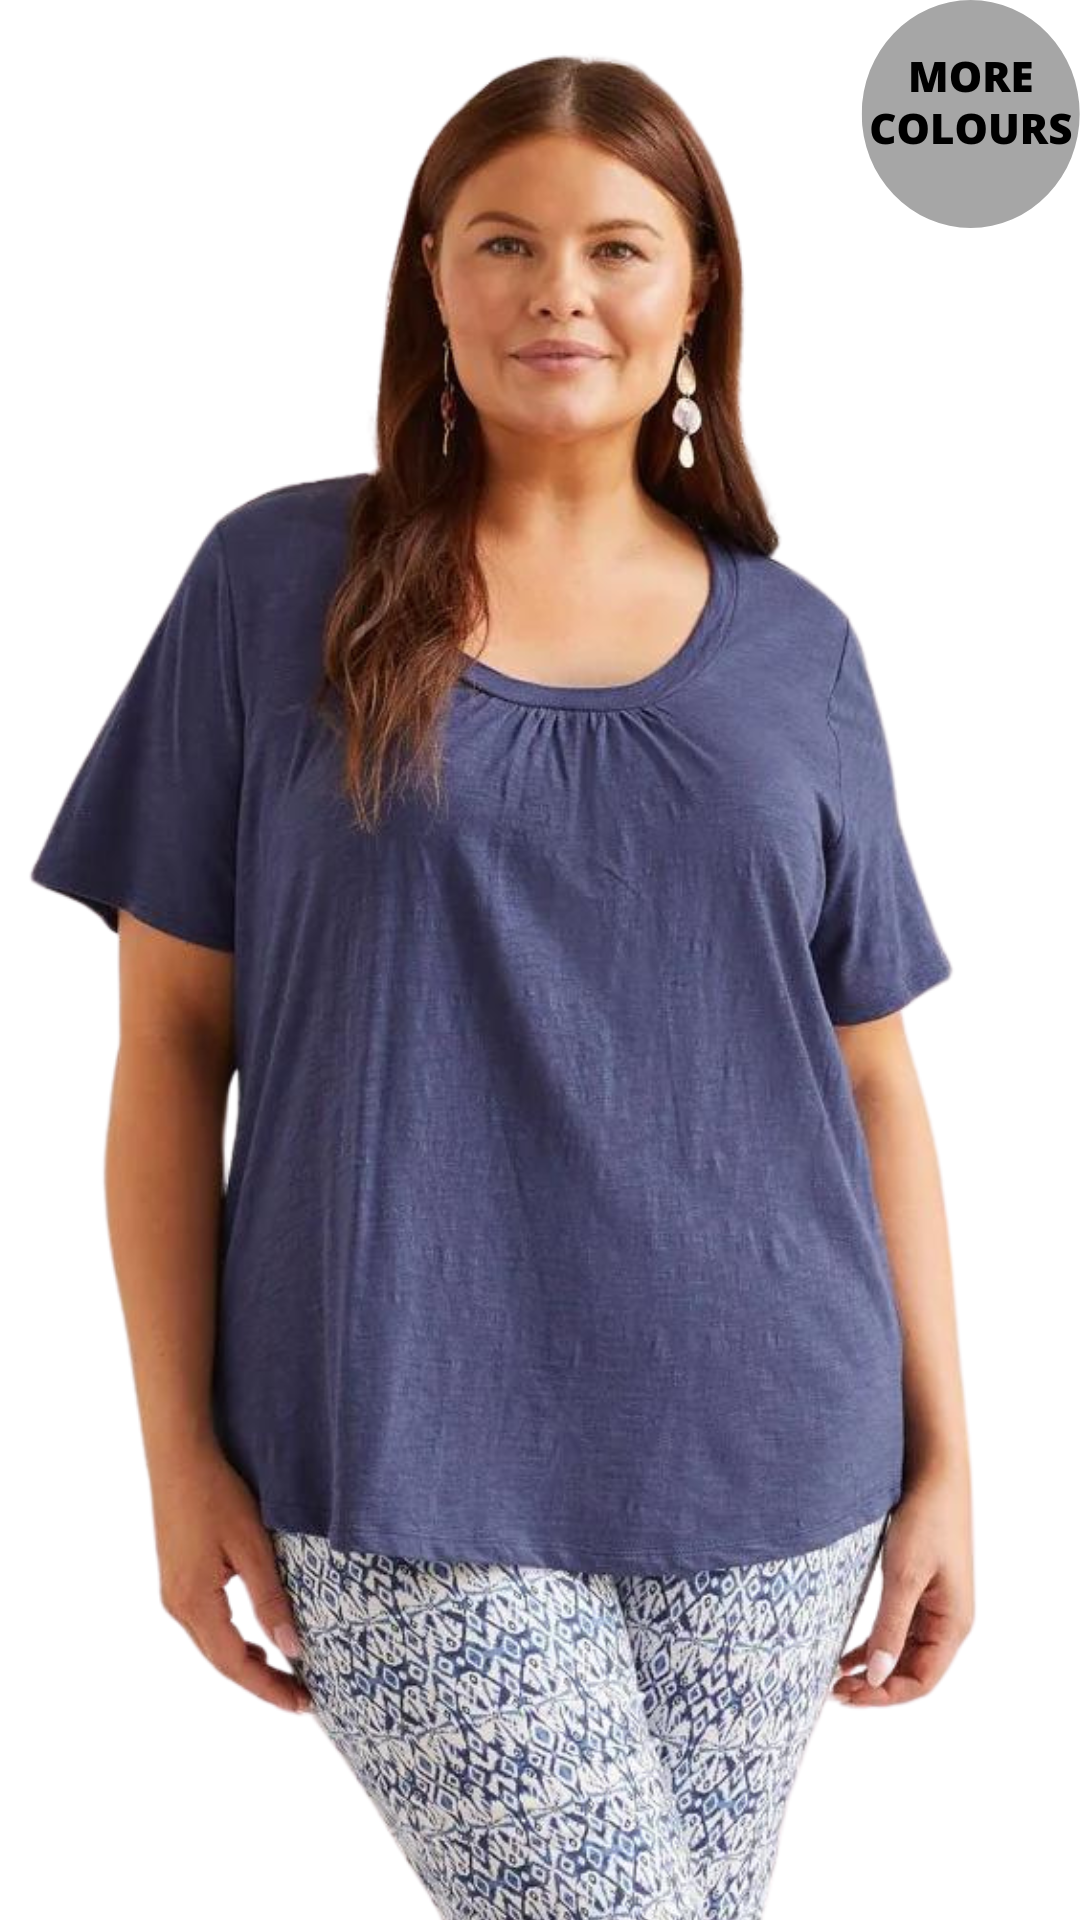 Size Inclusive Scoop Neck T-Shirt. Style TR1789V-3474